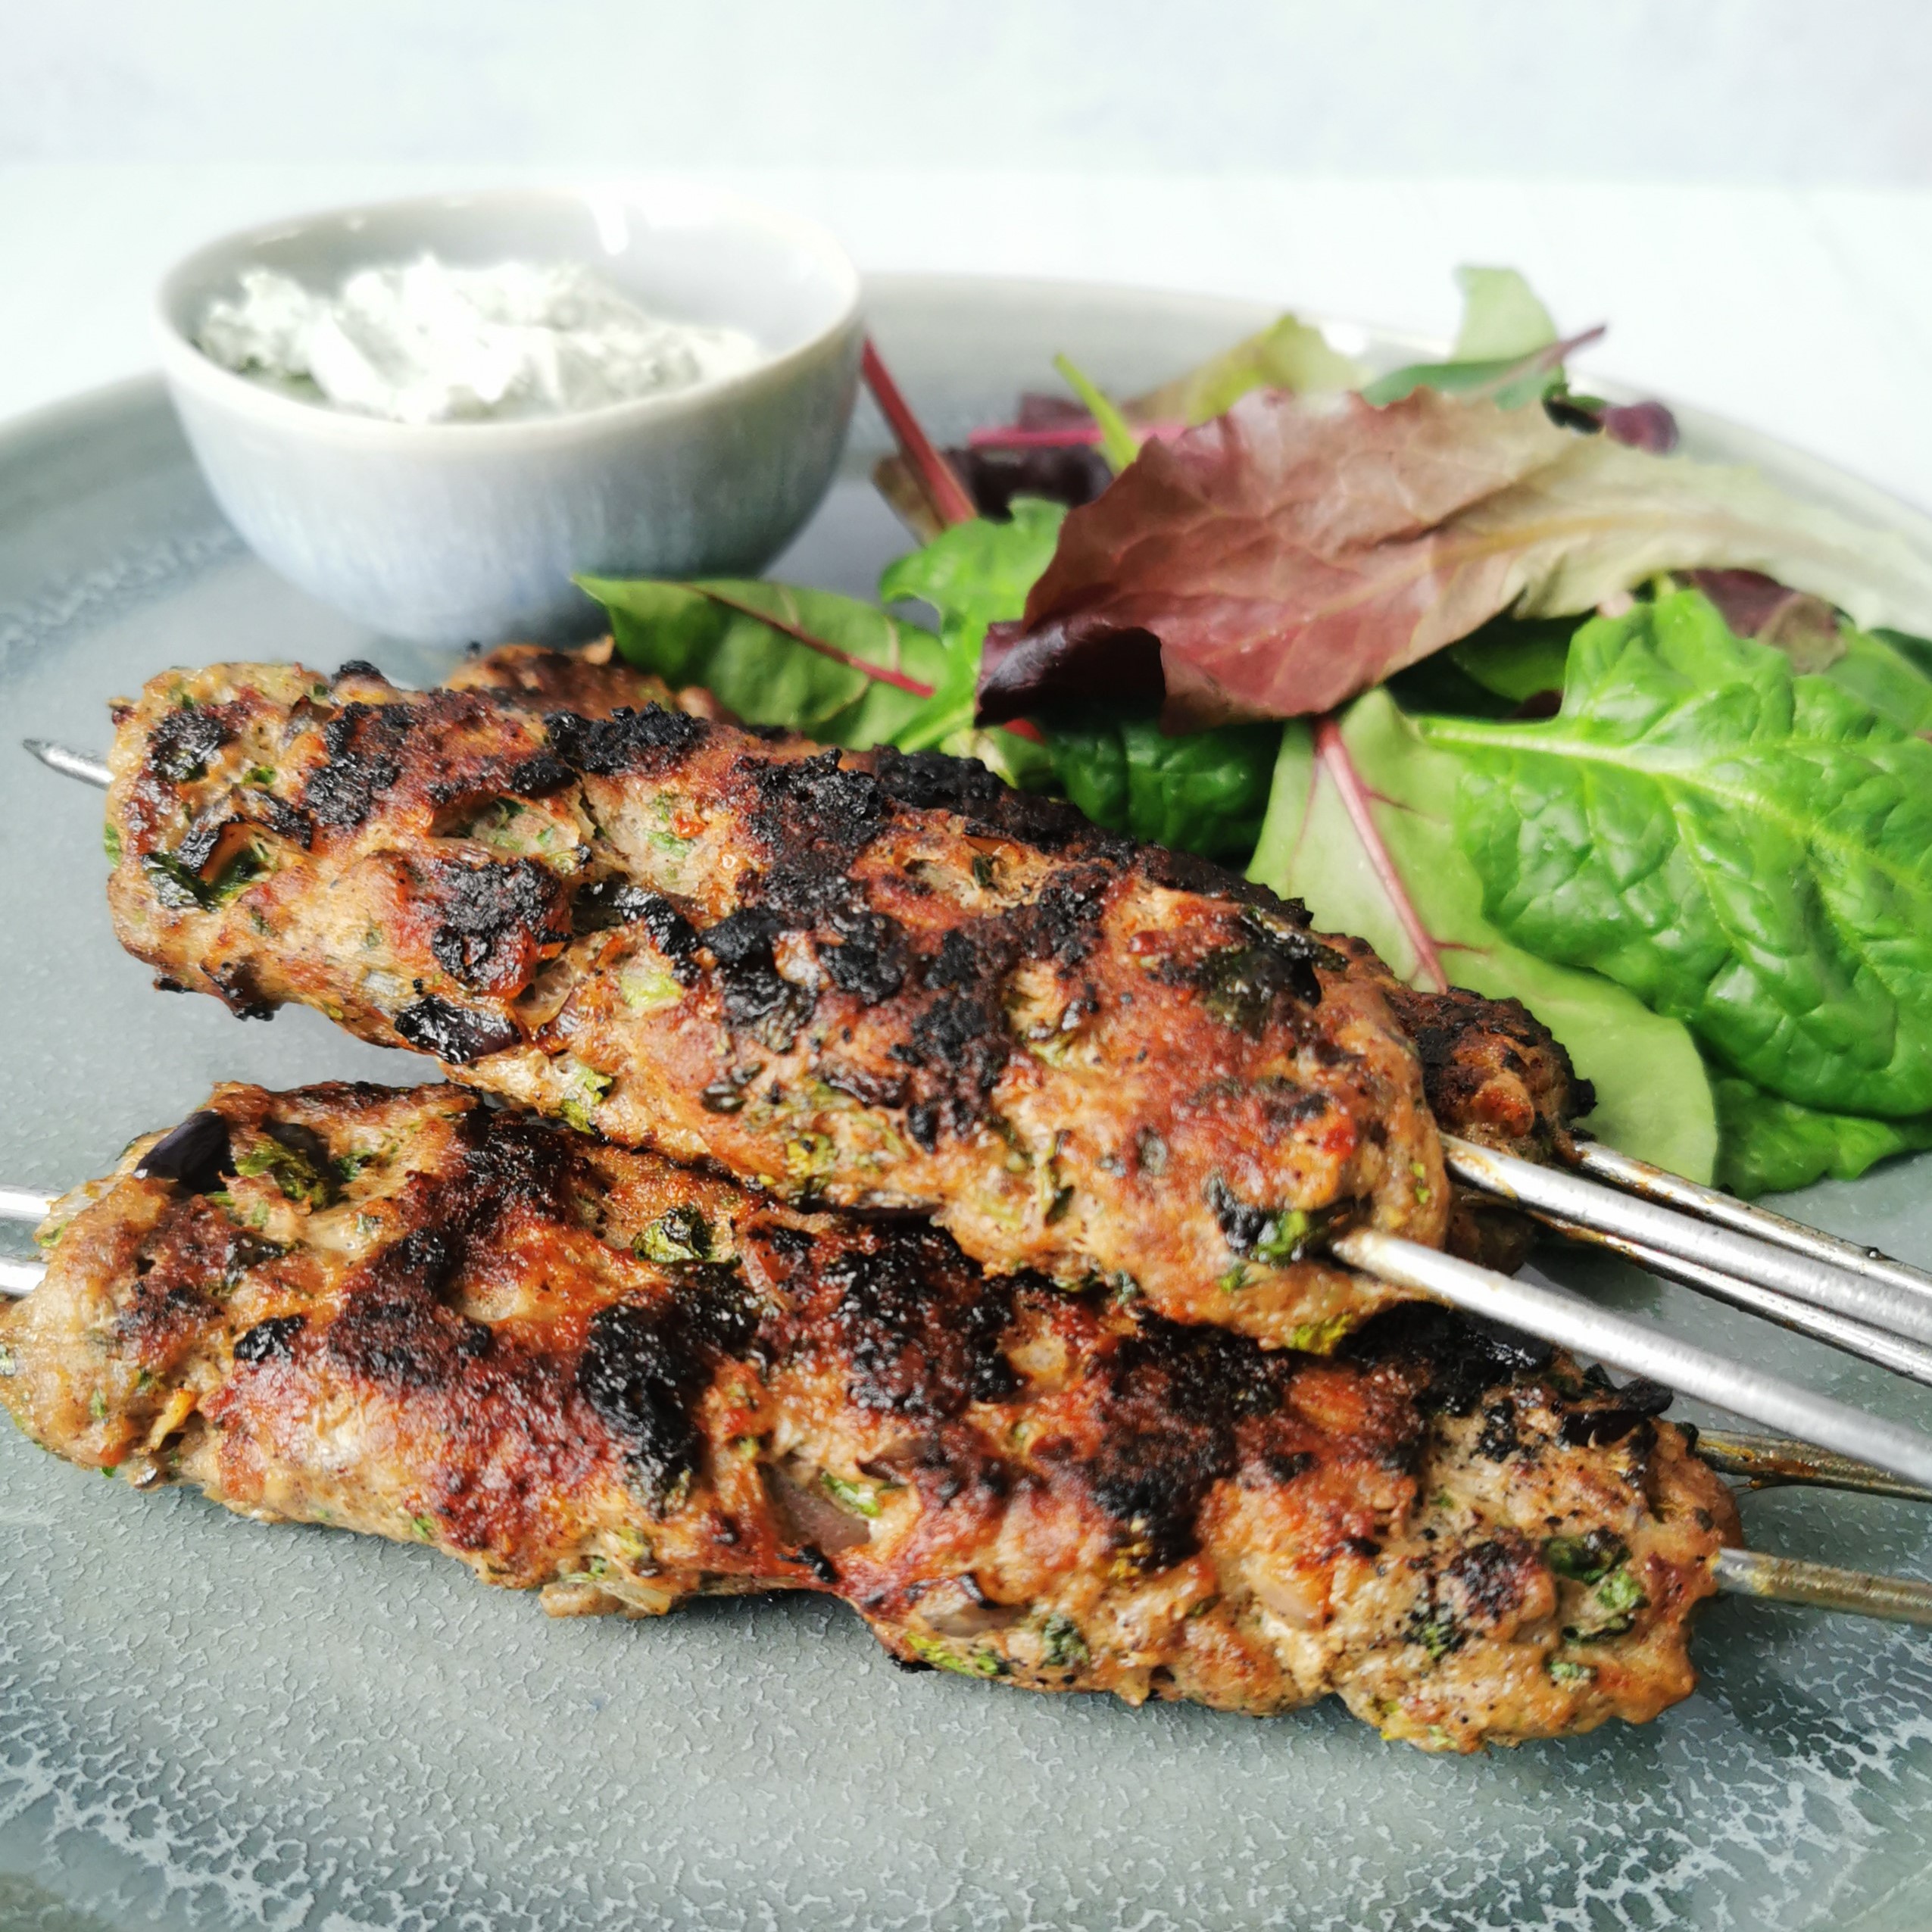 Lamb koftas on metal skewers with sald and a small bowl of mint yoghurt on a grey plate